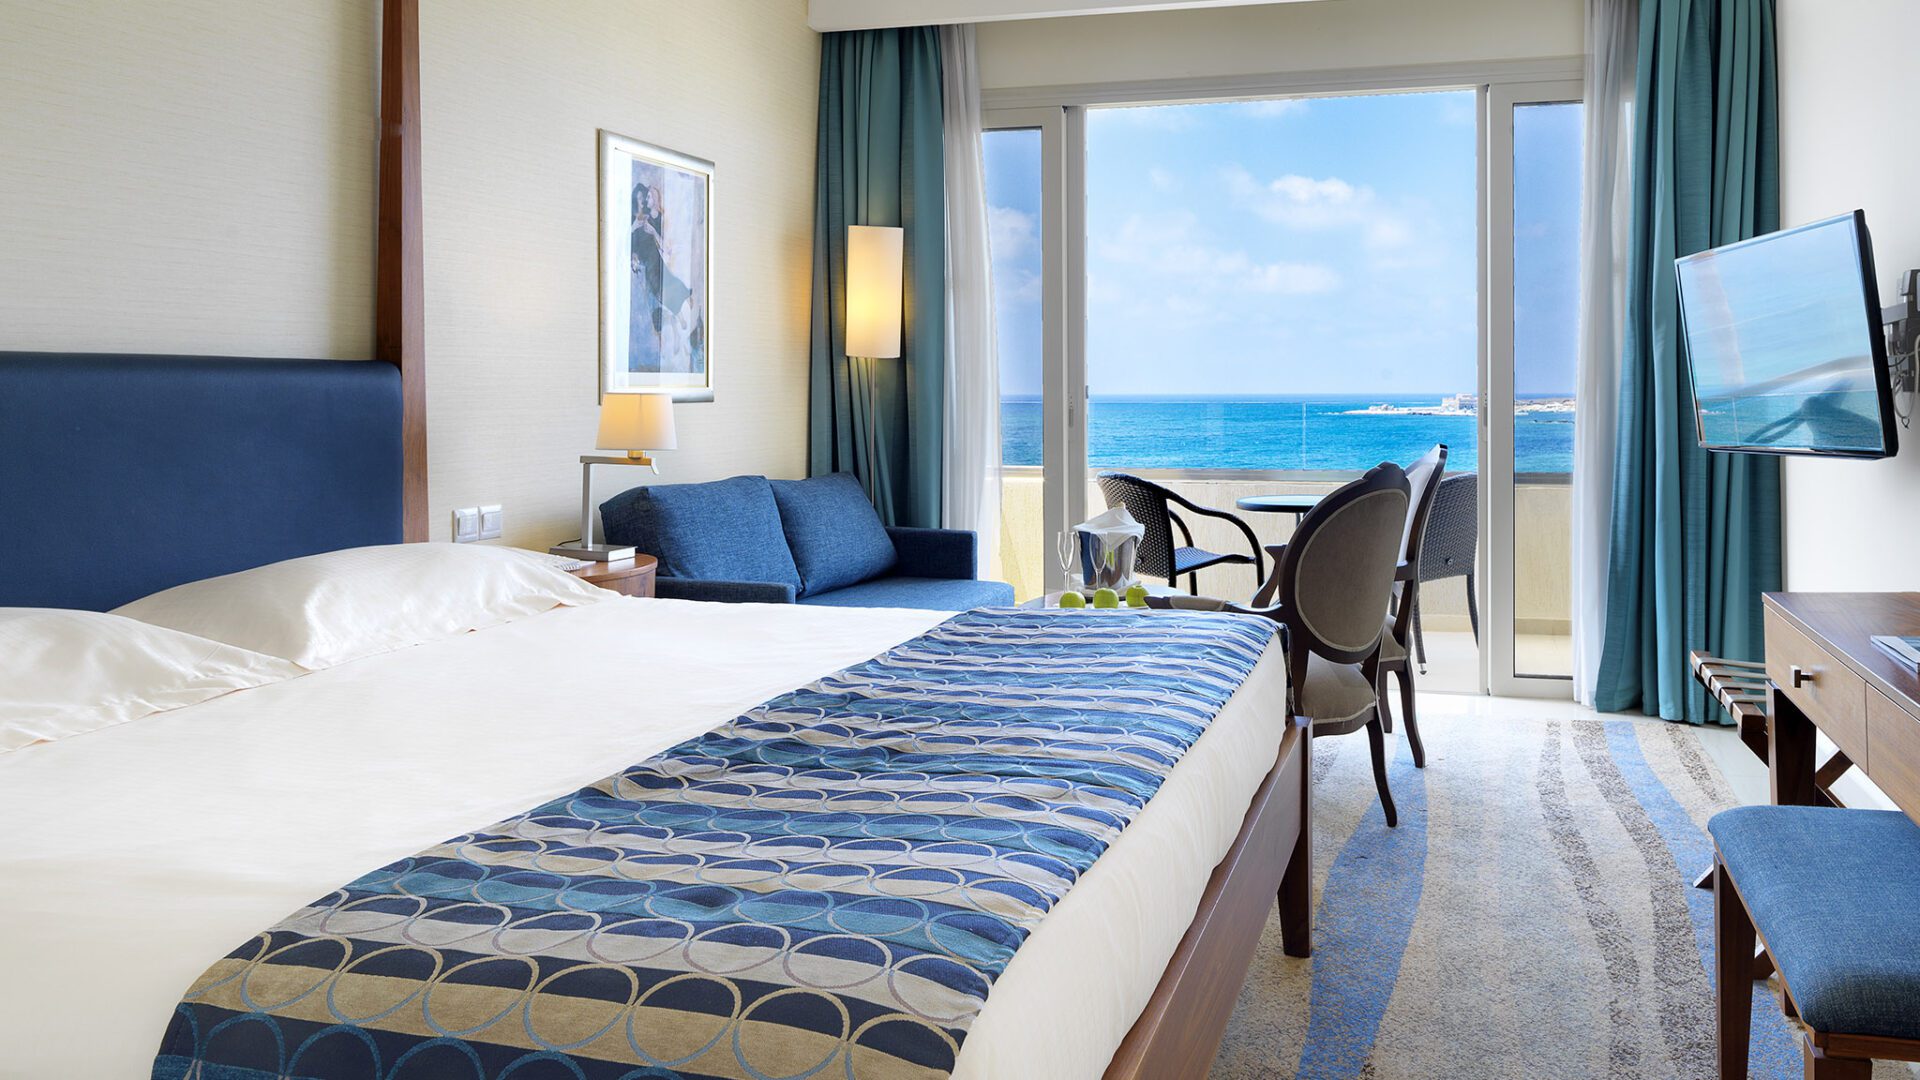 Luxury Sea View Room at Alexander the Great Beach Hotel in Paphos Cyprus